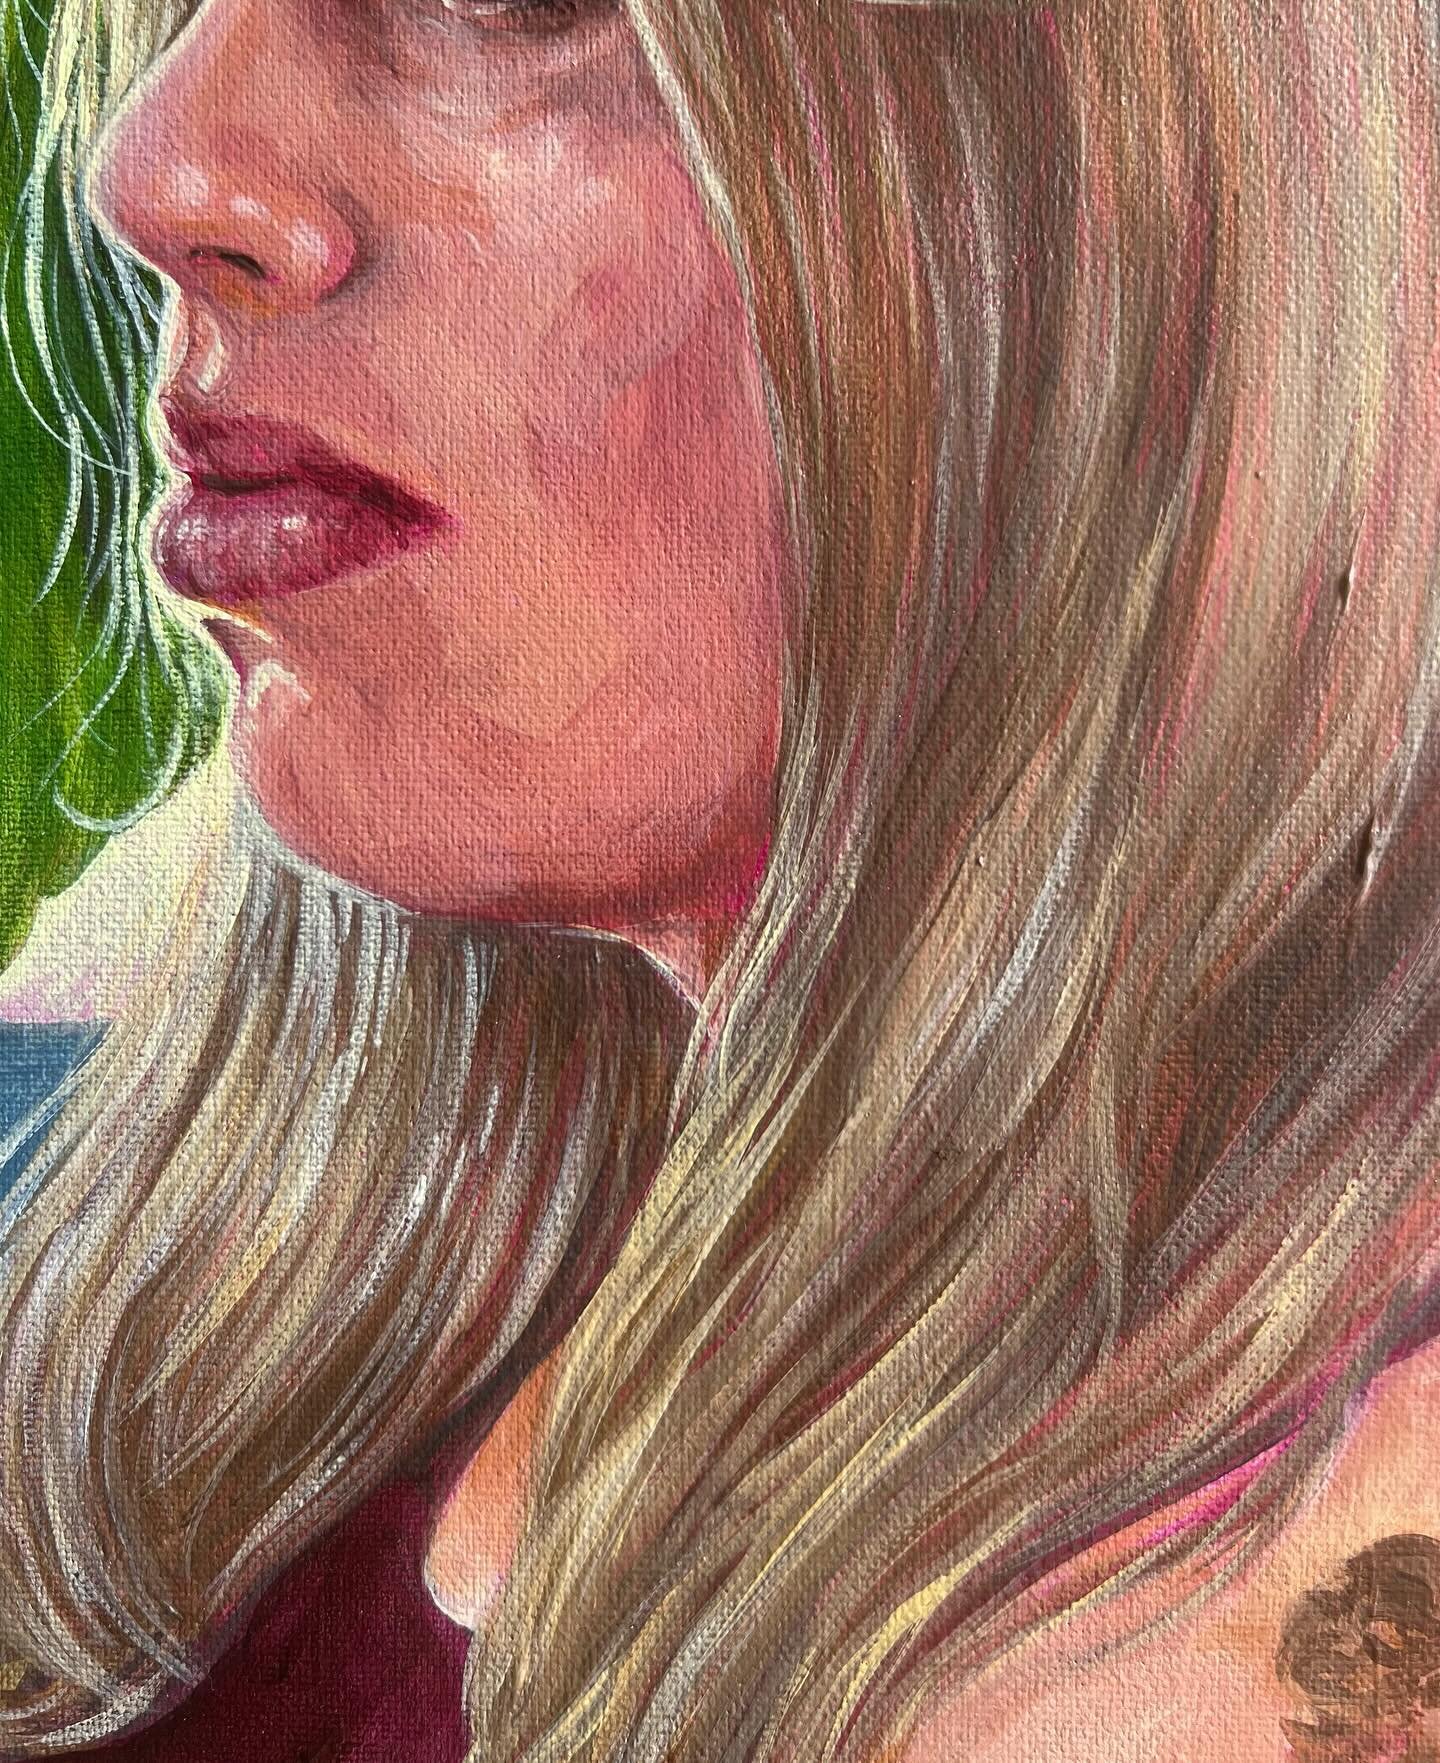 It&rsquo;s a gloomy day here and I just feel like painting (I can&rsquo;t, because motherhood, but once bedtime comes I&rsquo;ll be at the easel) ☔️ I&rsquo;ll settle for just looking at/sharing some painting closeups that I&rsquo;m proud of. Here ar